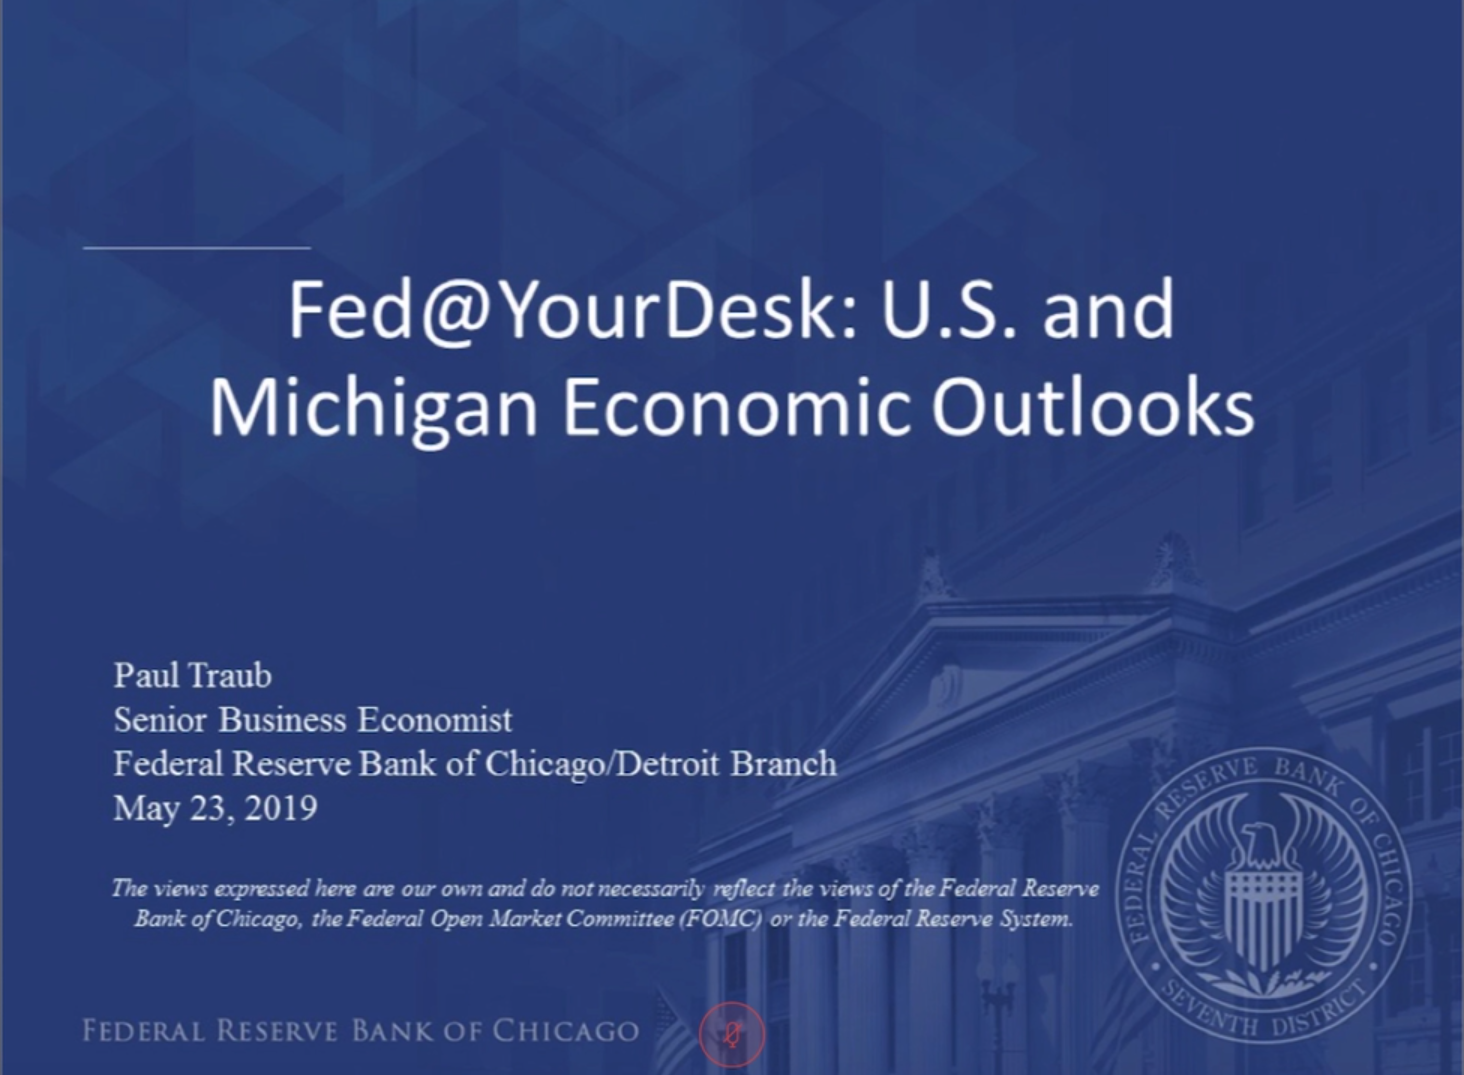 Title slide for the Fed @ Your Desk webinar U.S. and Michigan     Economic Outlooks